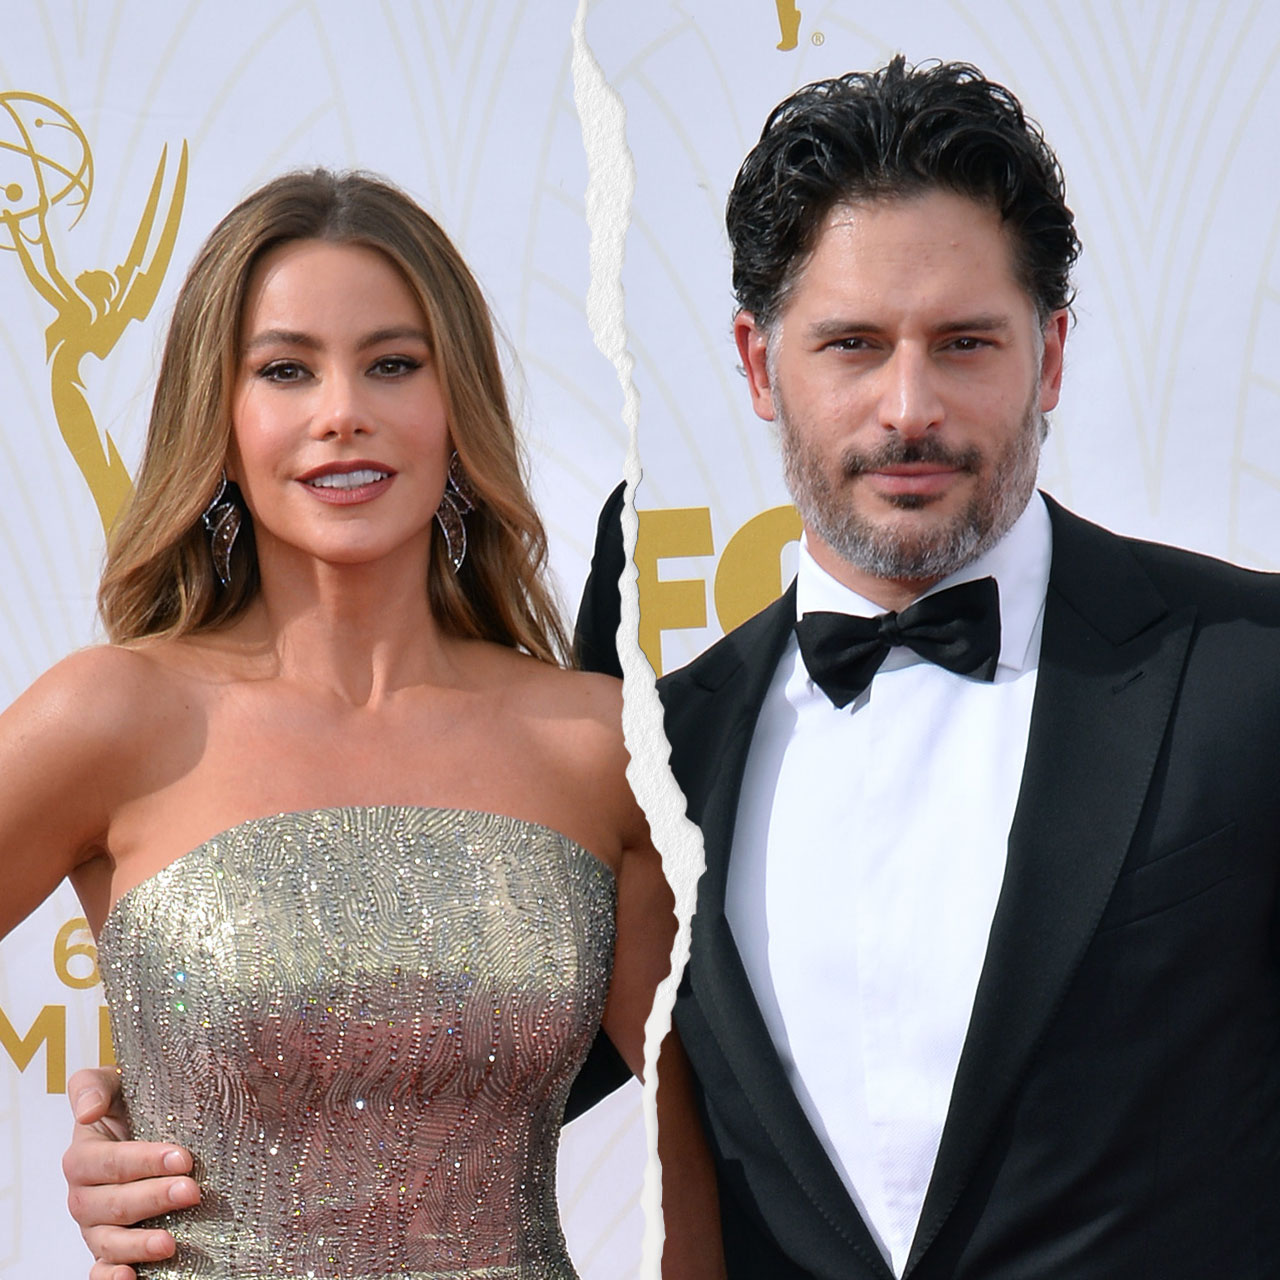 Sofía Vergara Says She Divorced Joe Manganiello Because He Wanted To Have  Kids And She 'Didn't Want To Be An Old Mom' - SHEfinds